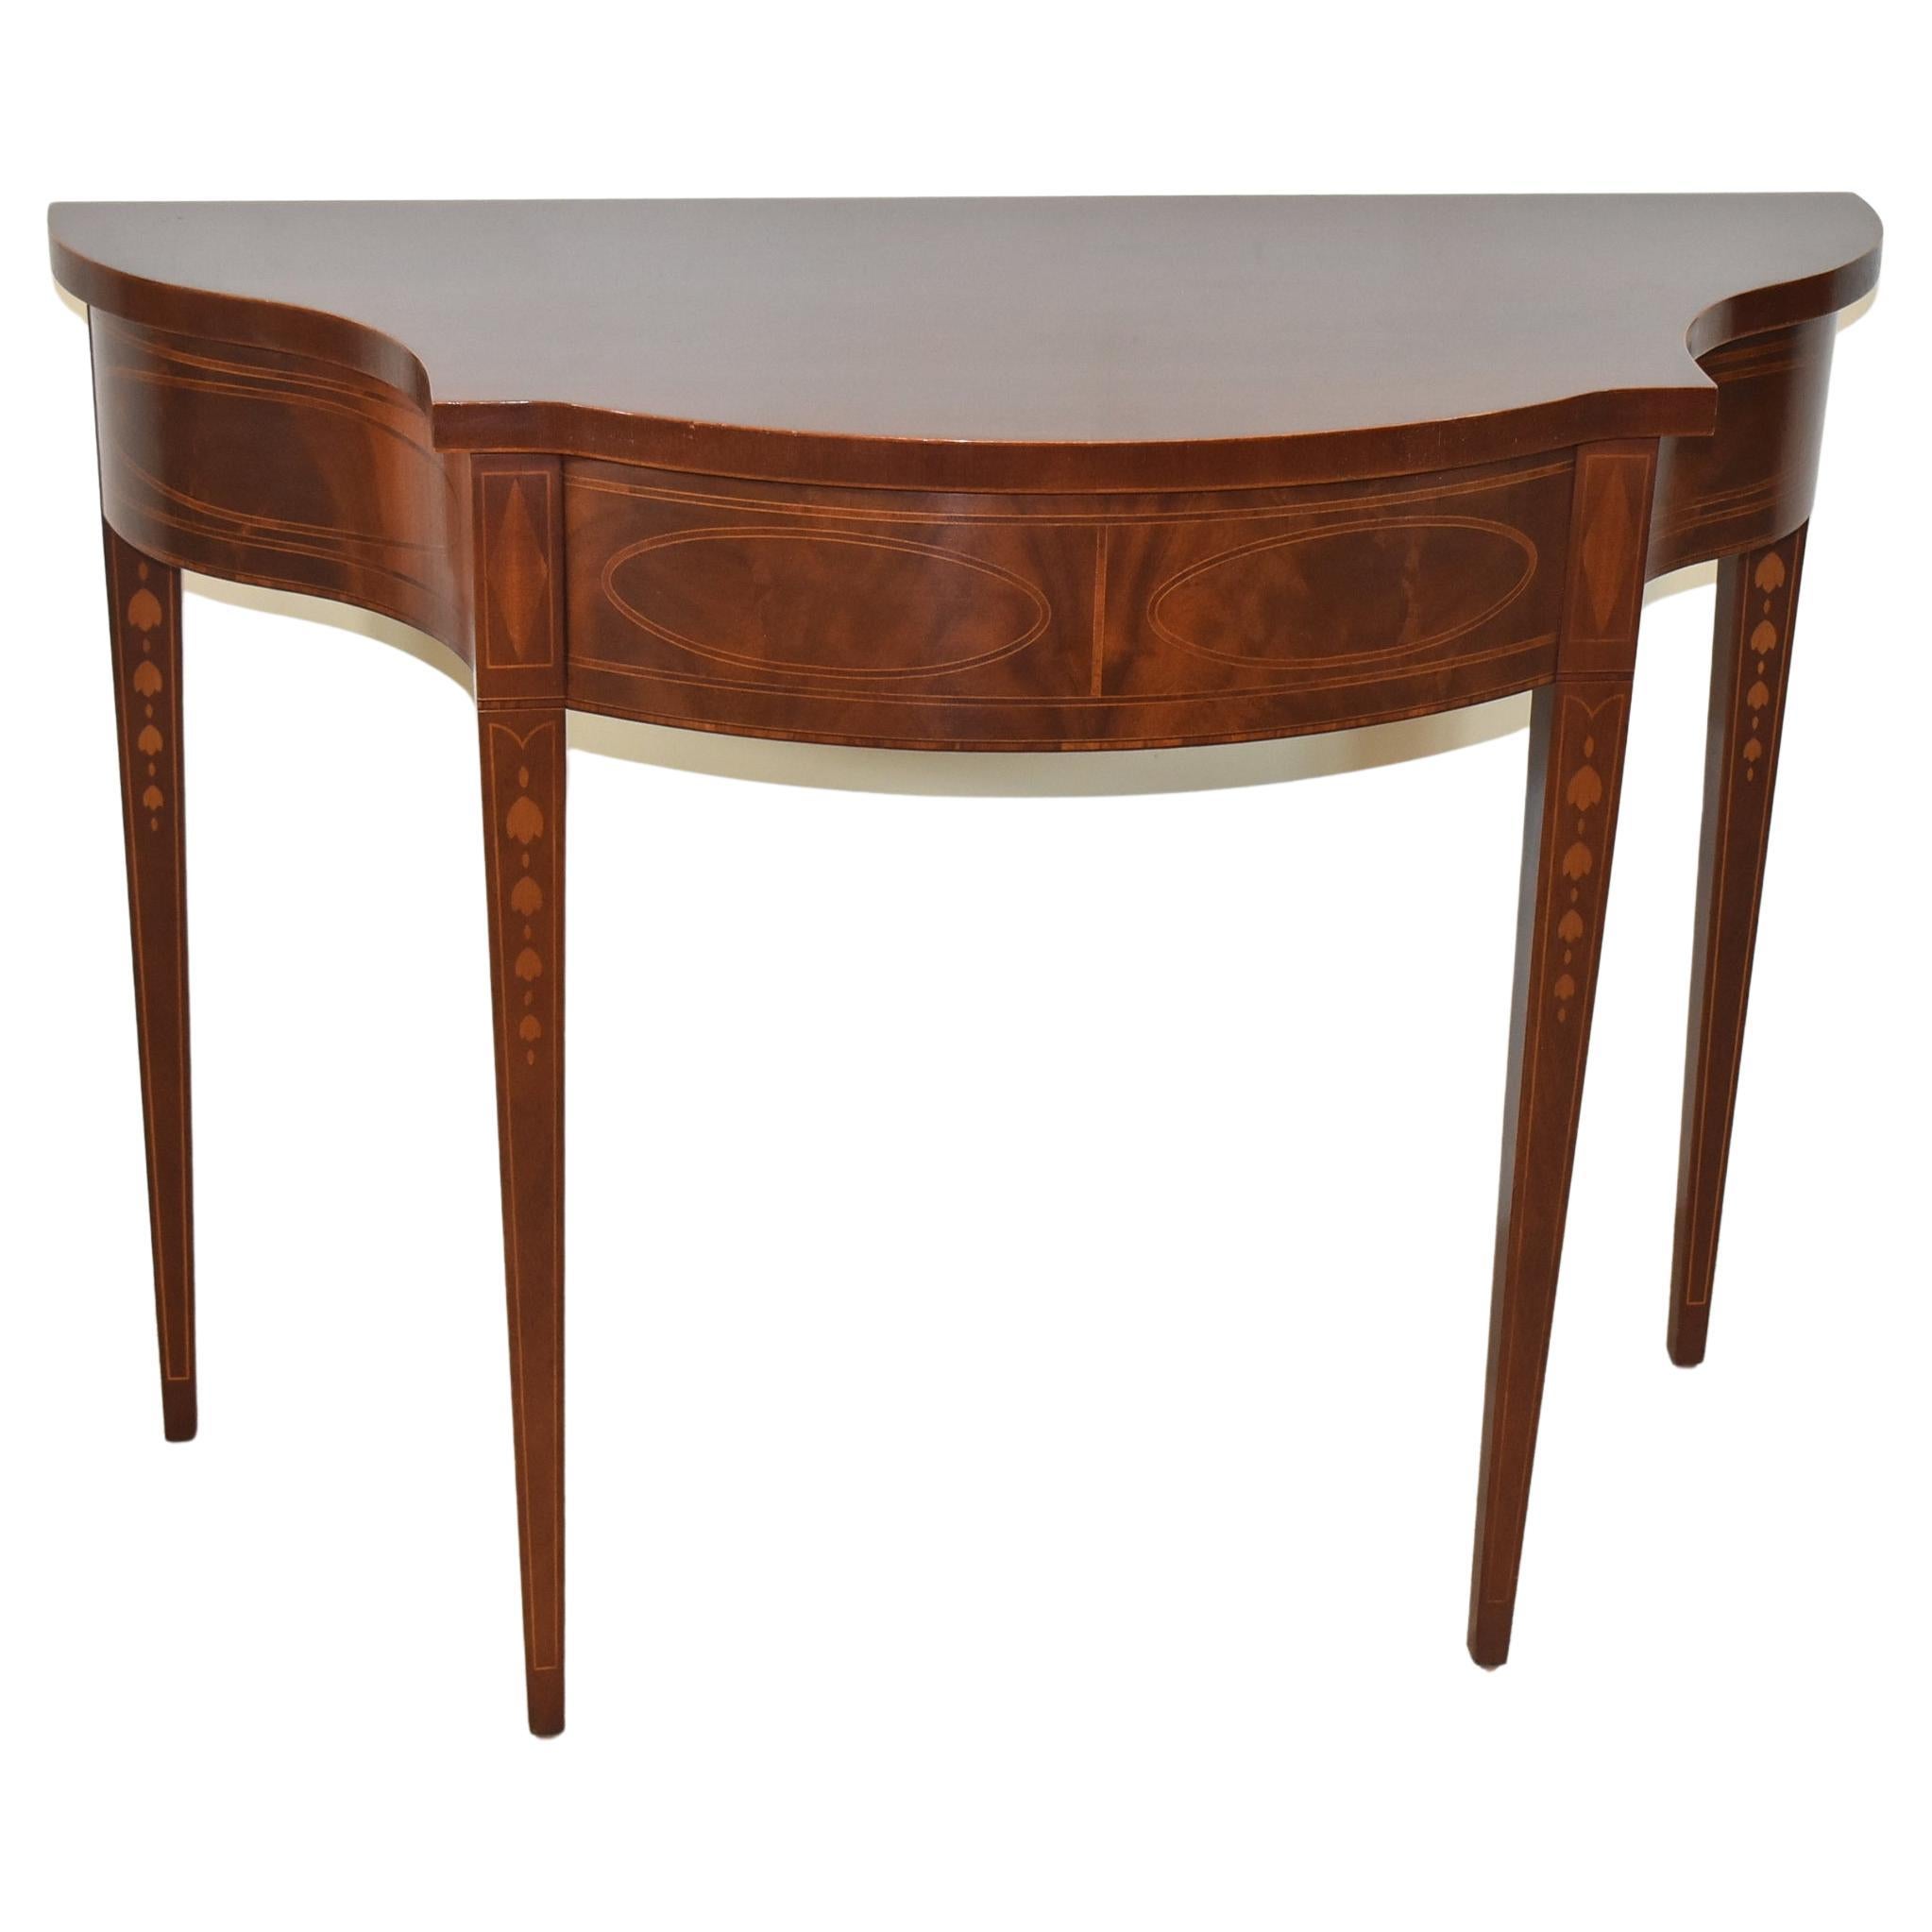 Baker Historic Charleston Mahogany Demilune Serpentine Front Table For Sale